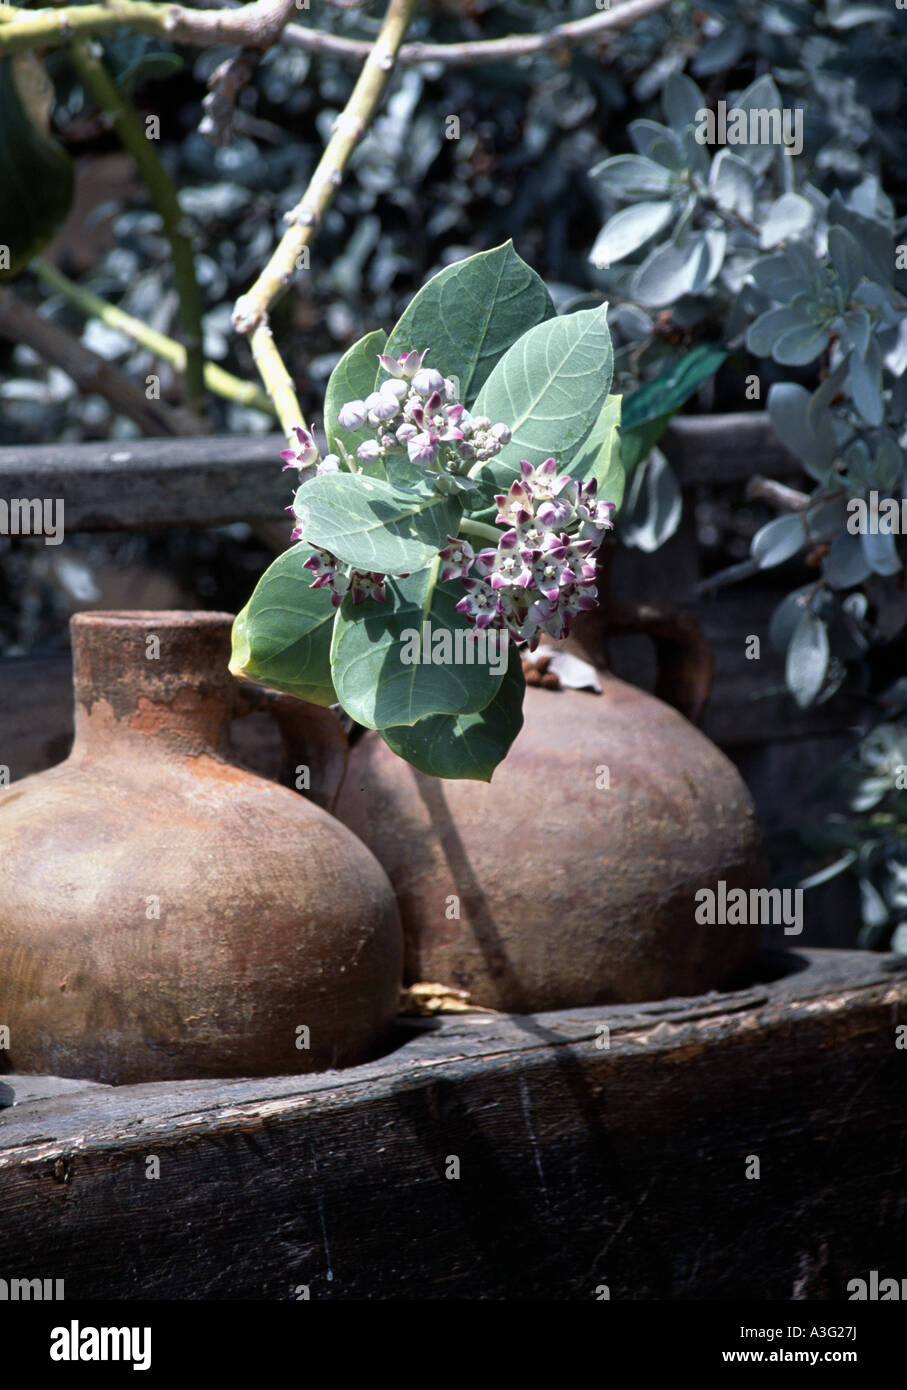 Ornamental garden pots photographed in a garden of a house once owned by Rudolf Nureyev on the Caribbean island of St.Barts Stock Photo